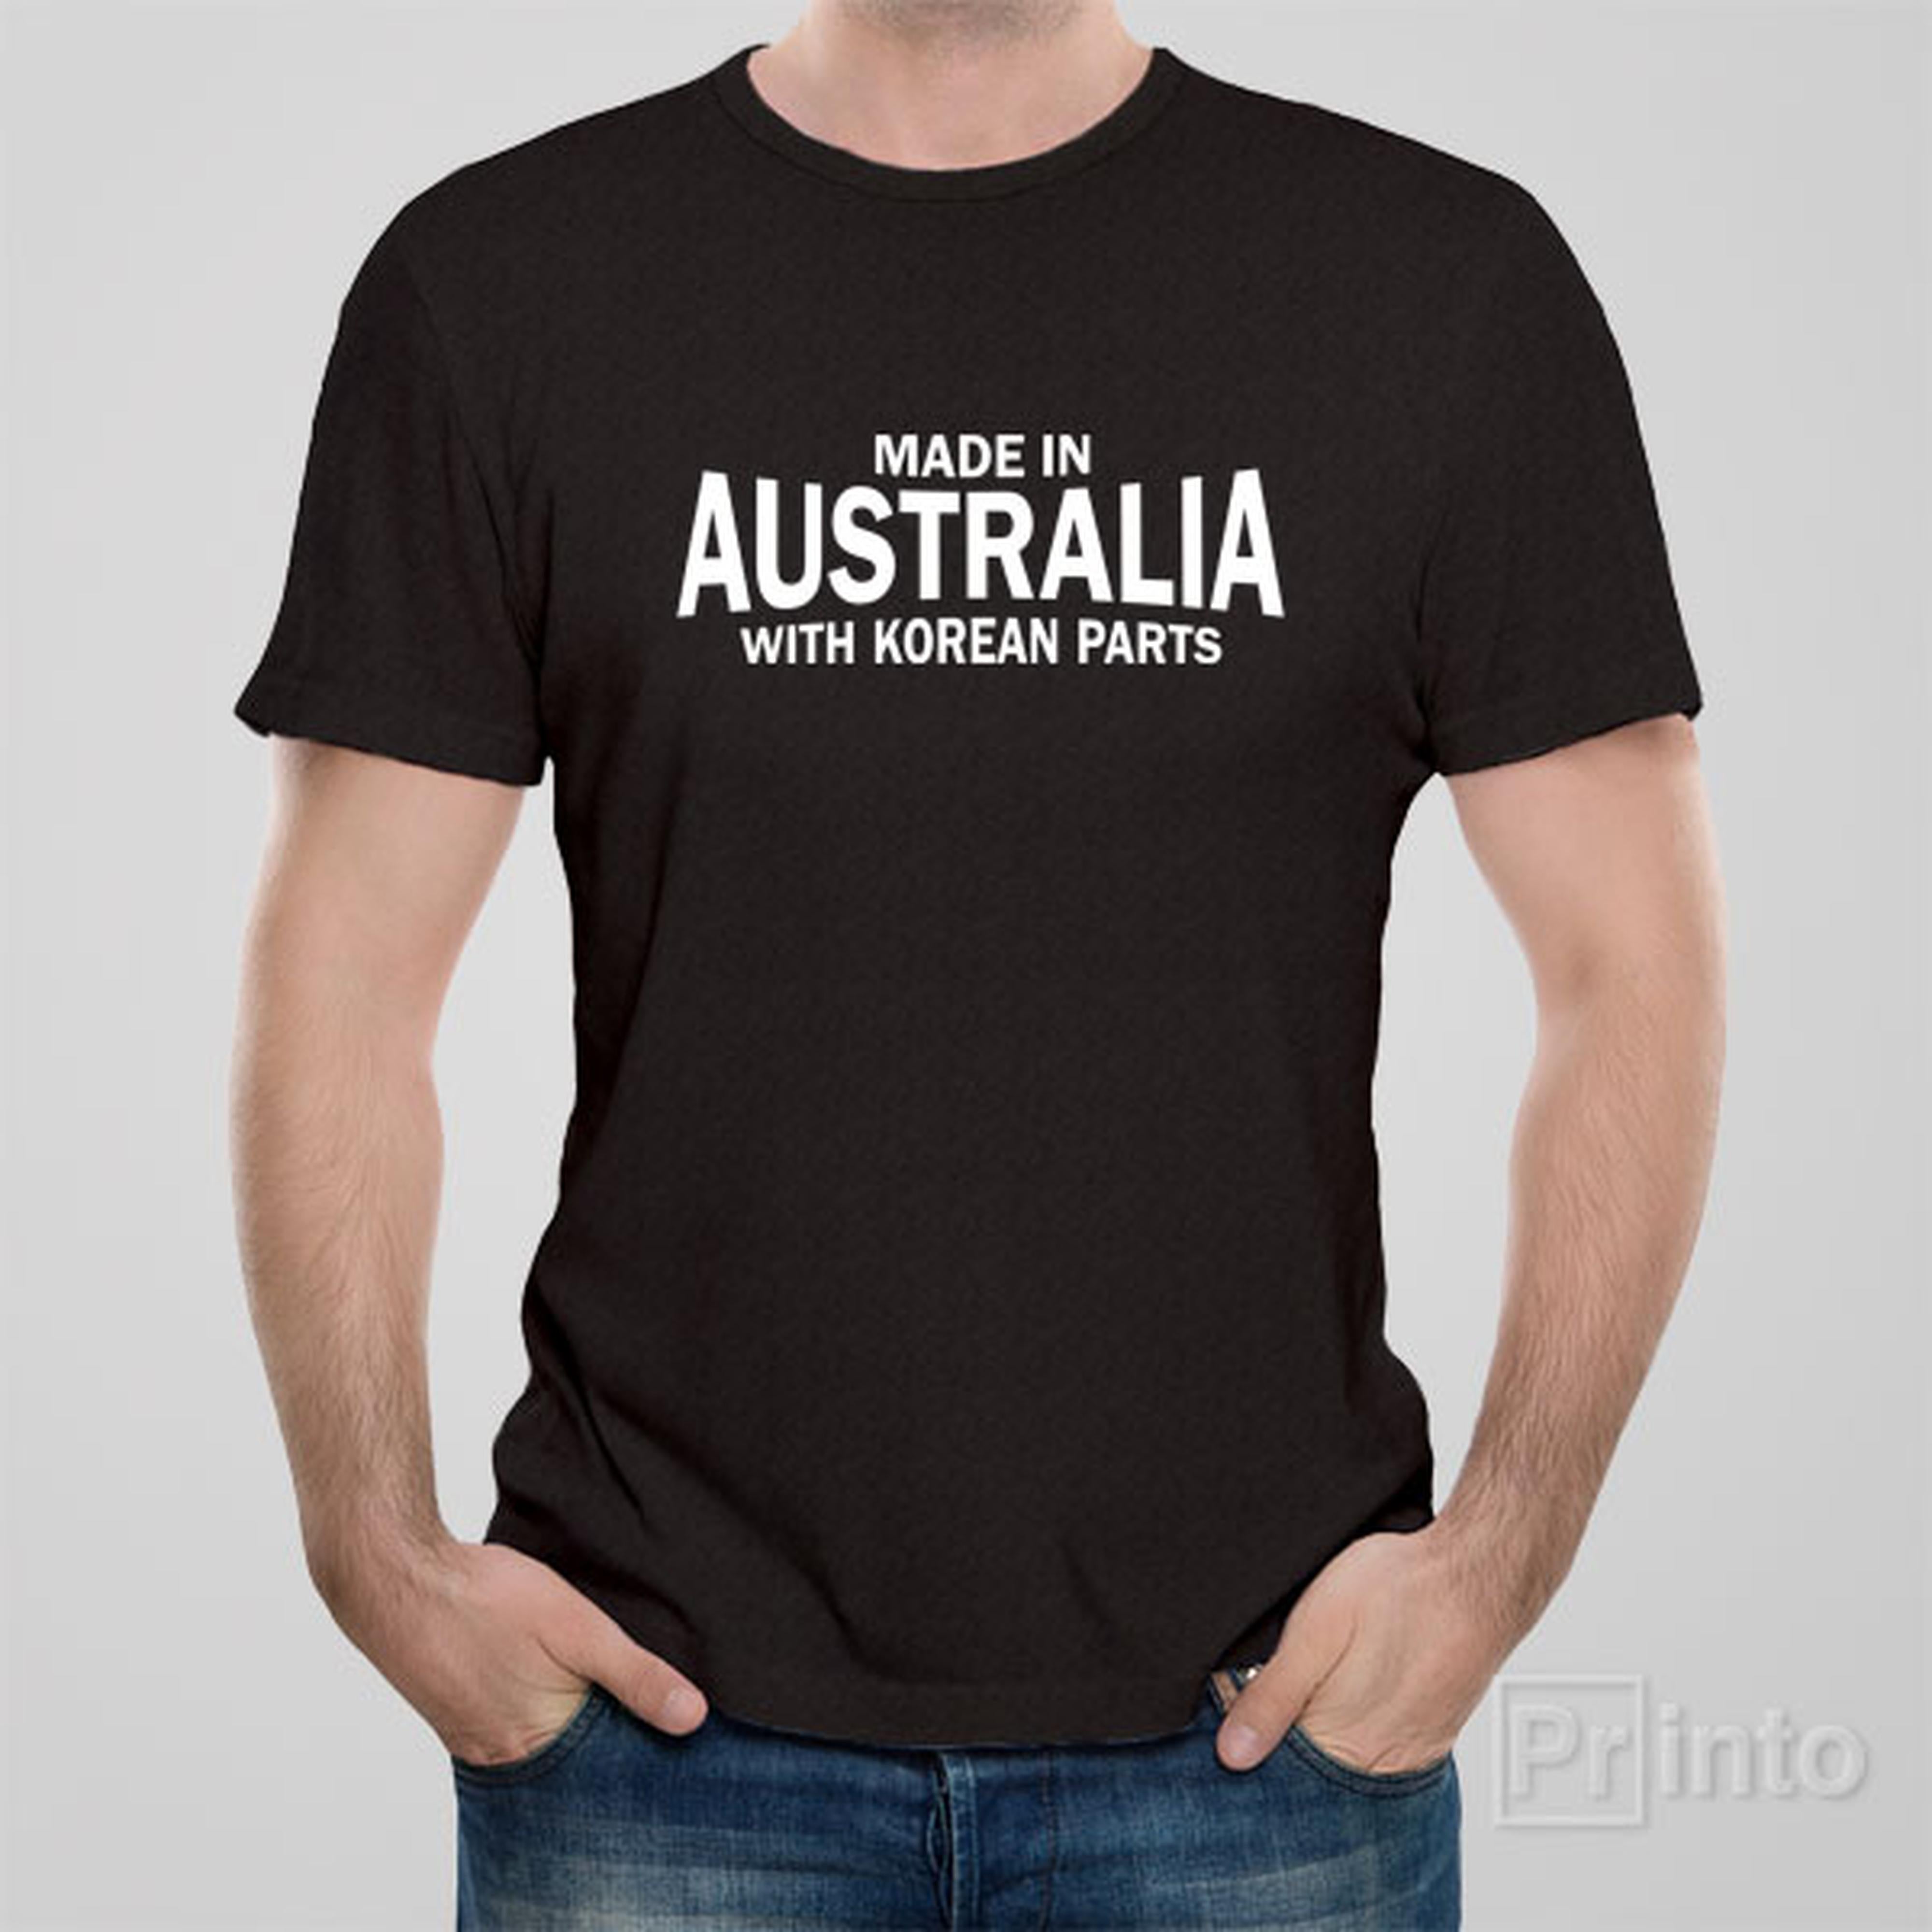 made-in-australia-with-korean-parts-t-shirt